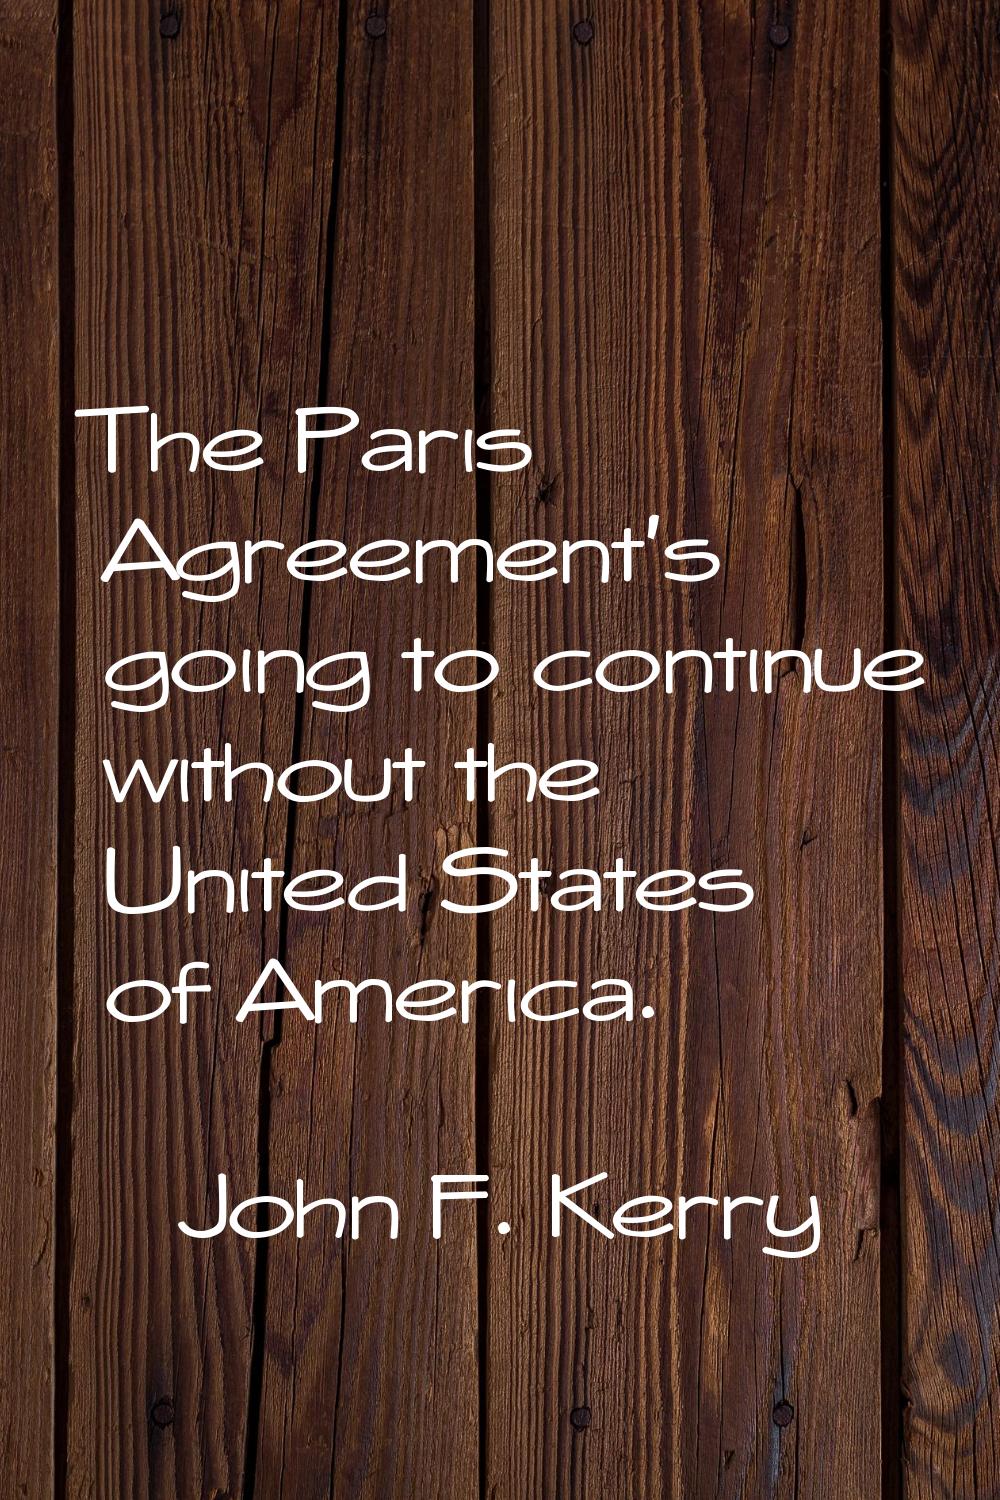 The Paris Agreement's going to continue without the United States of America.